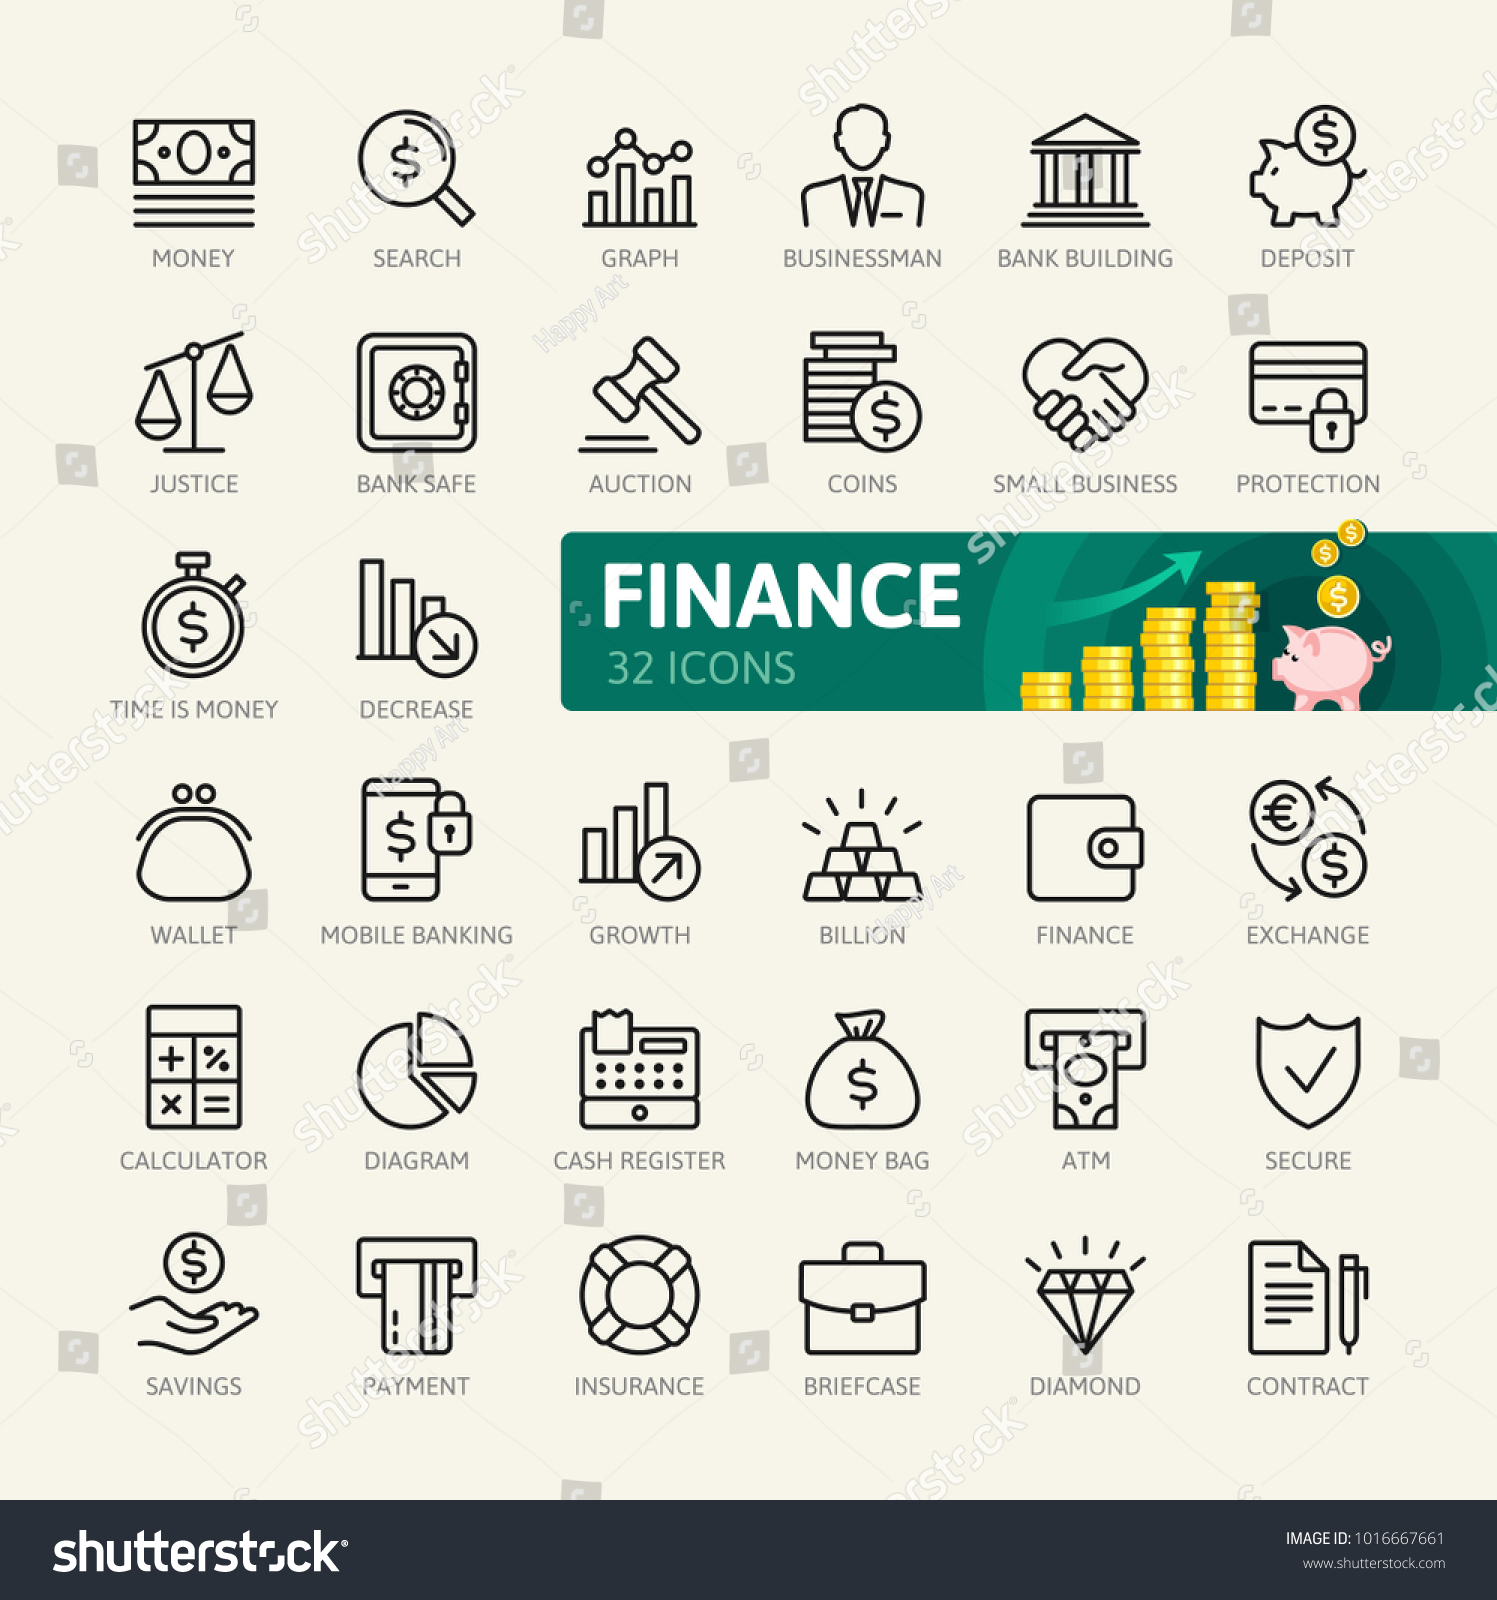 Money, finance, payments elements - minimal thin line web icon set. Outline icons collection. Simple vector illustration. #1016667661